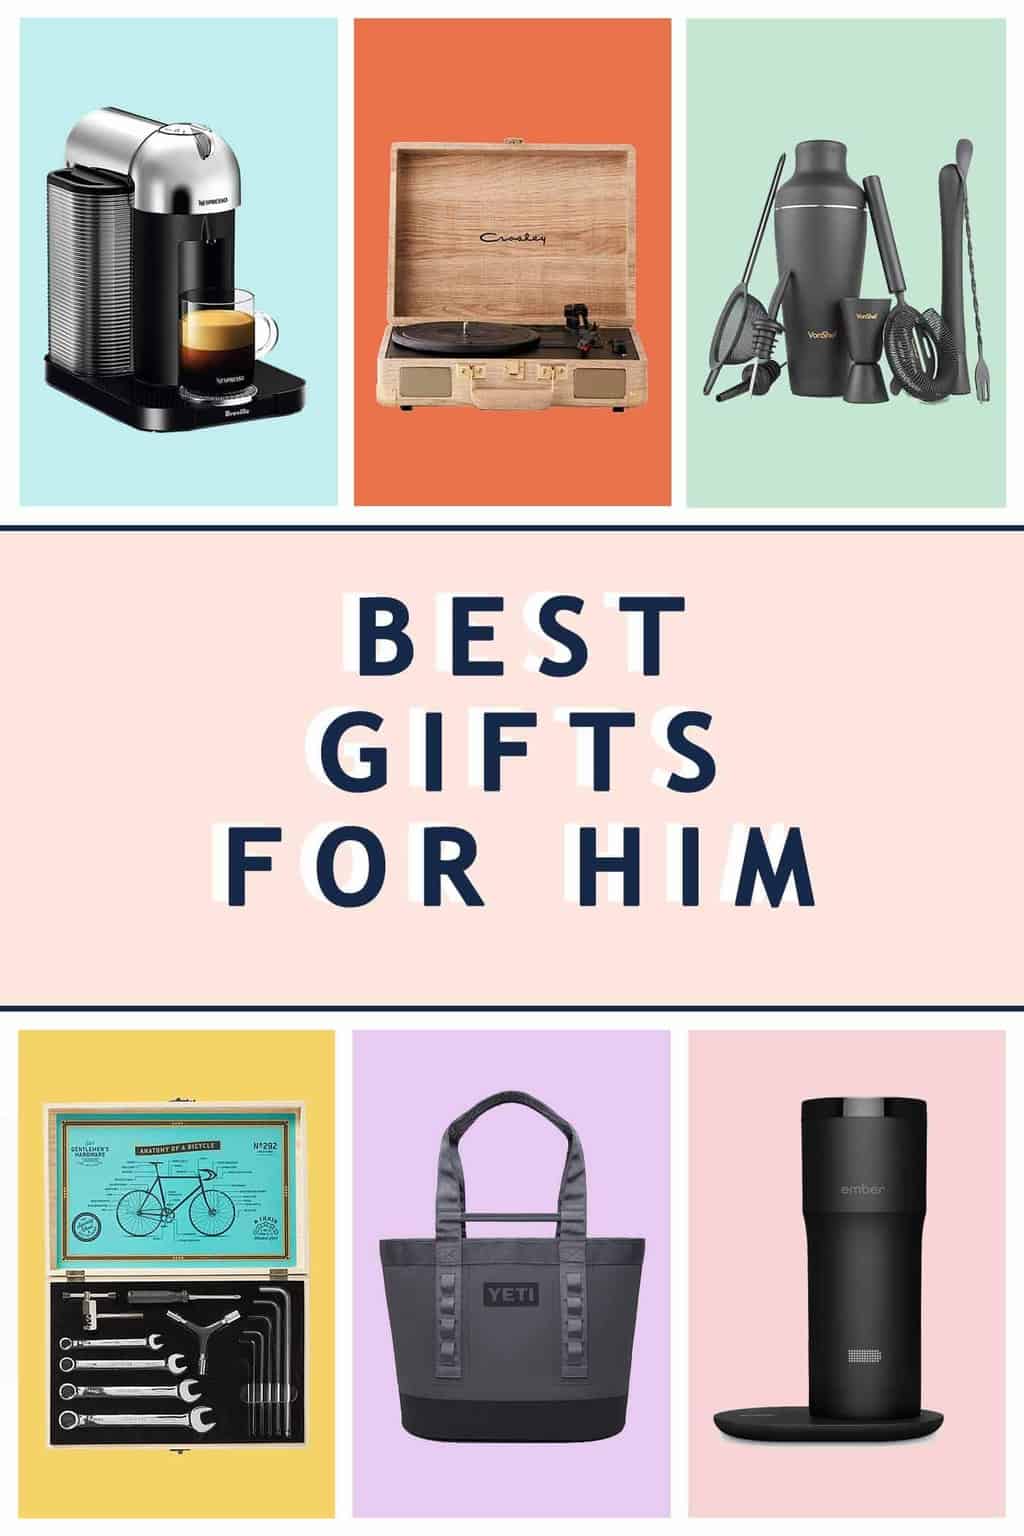 Small Gifts for Him UK | Gift bags for men, small gift ideas for boys UK,  presents for men UK delivery, thank you gifts for boys, mini pamper gifts  for him